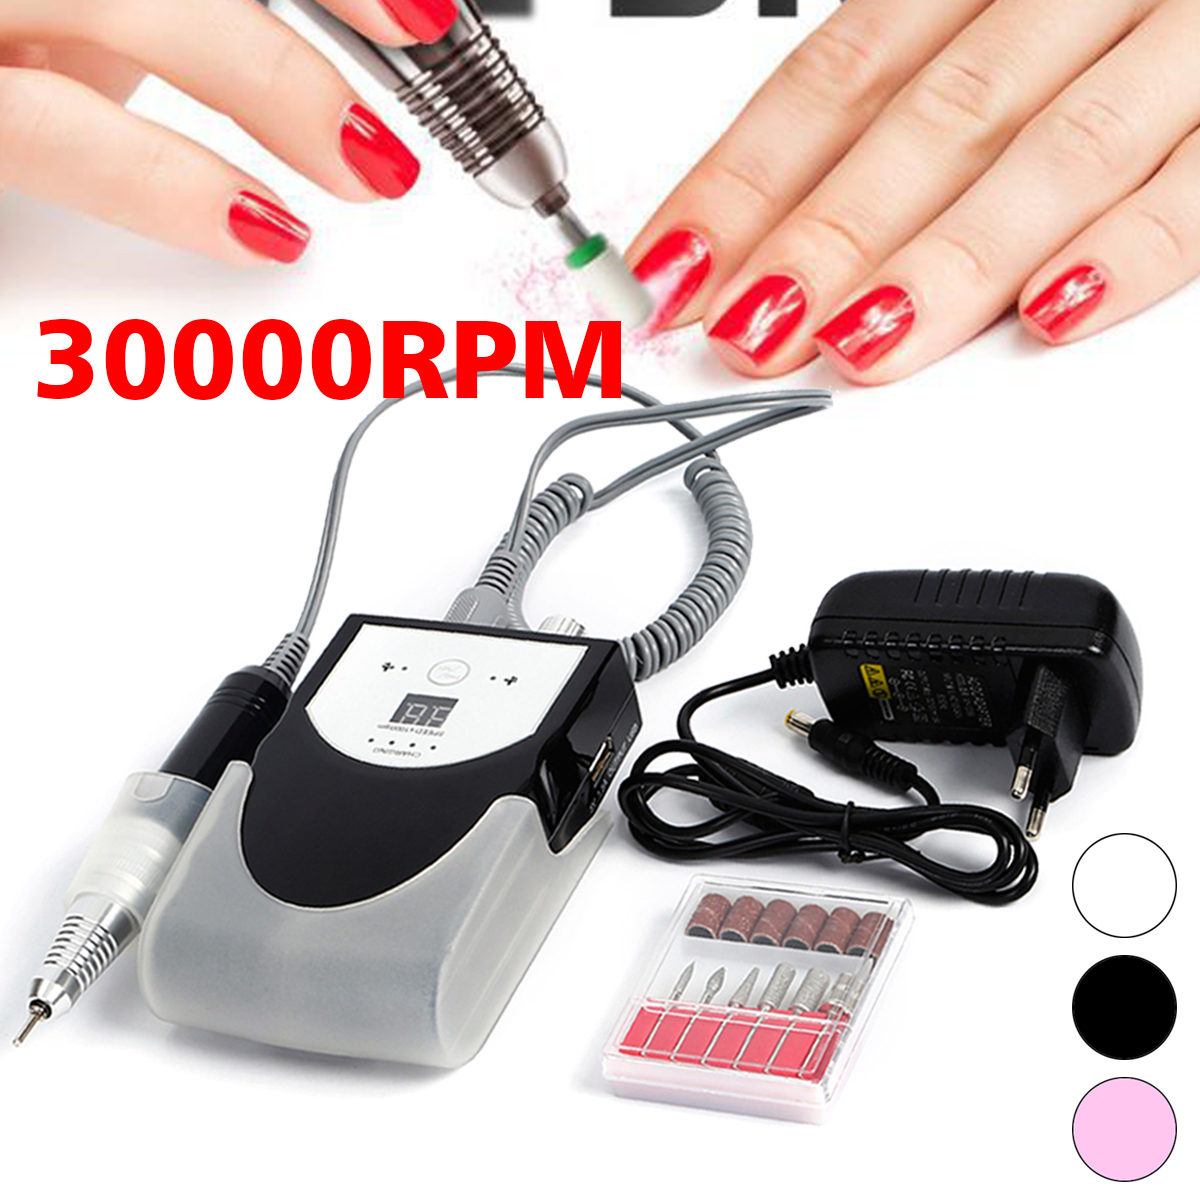 30000RPM--Adjustable-Speed-LCD-Rechargeable-Electric-Rotary-Nail-File-Drill-Machine-Manicure-Tool-1242785-1